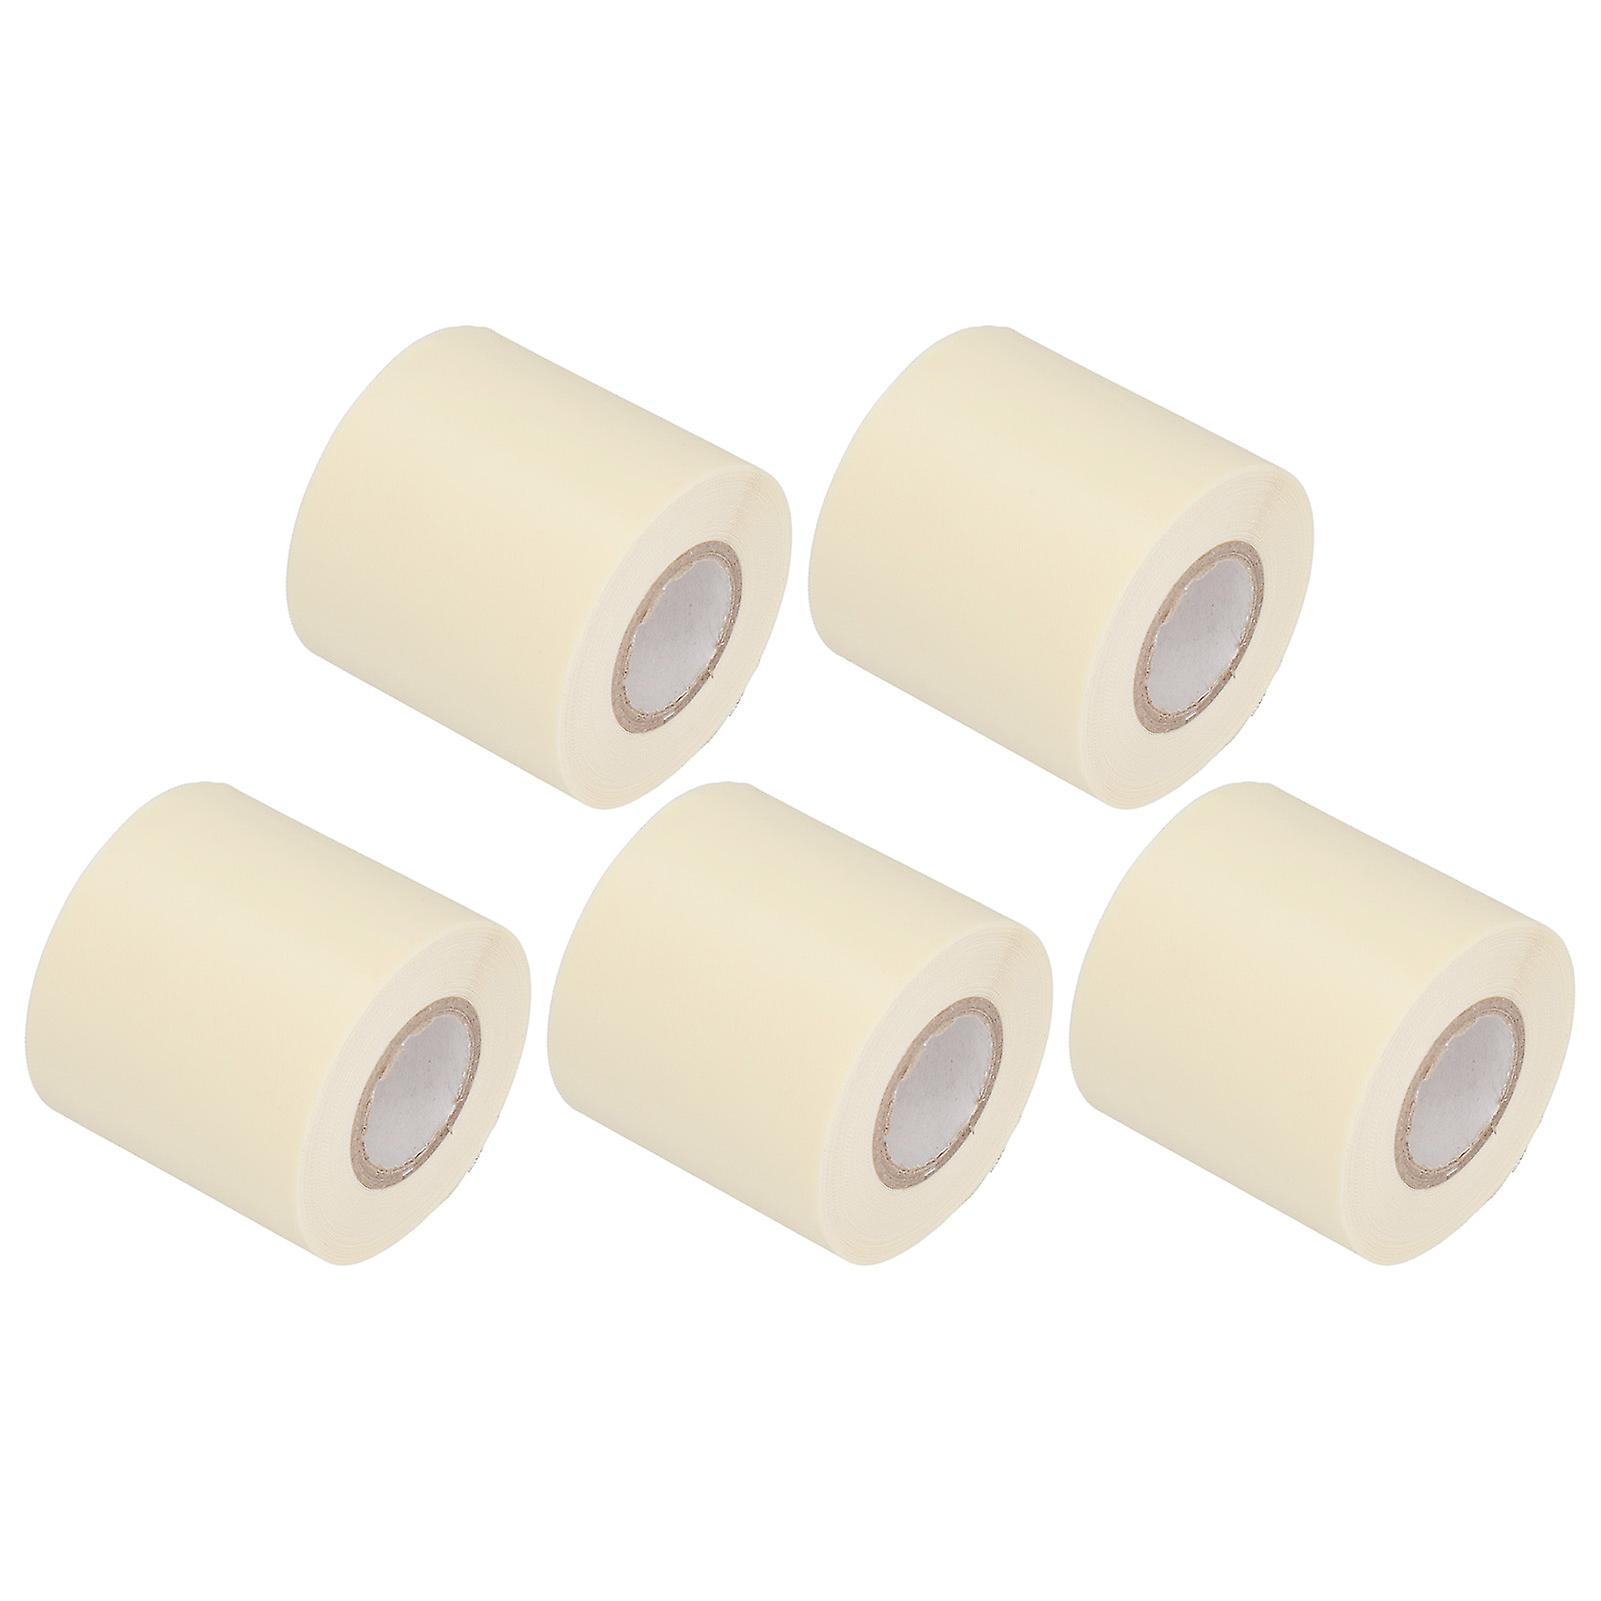 Anti Leak Repair Tape， Air Conditioning Duct Tape， 5 Oil Resistant Pipe Protectors 6cm Wide For Electrical Equipment And Supplies， Cables[beige]